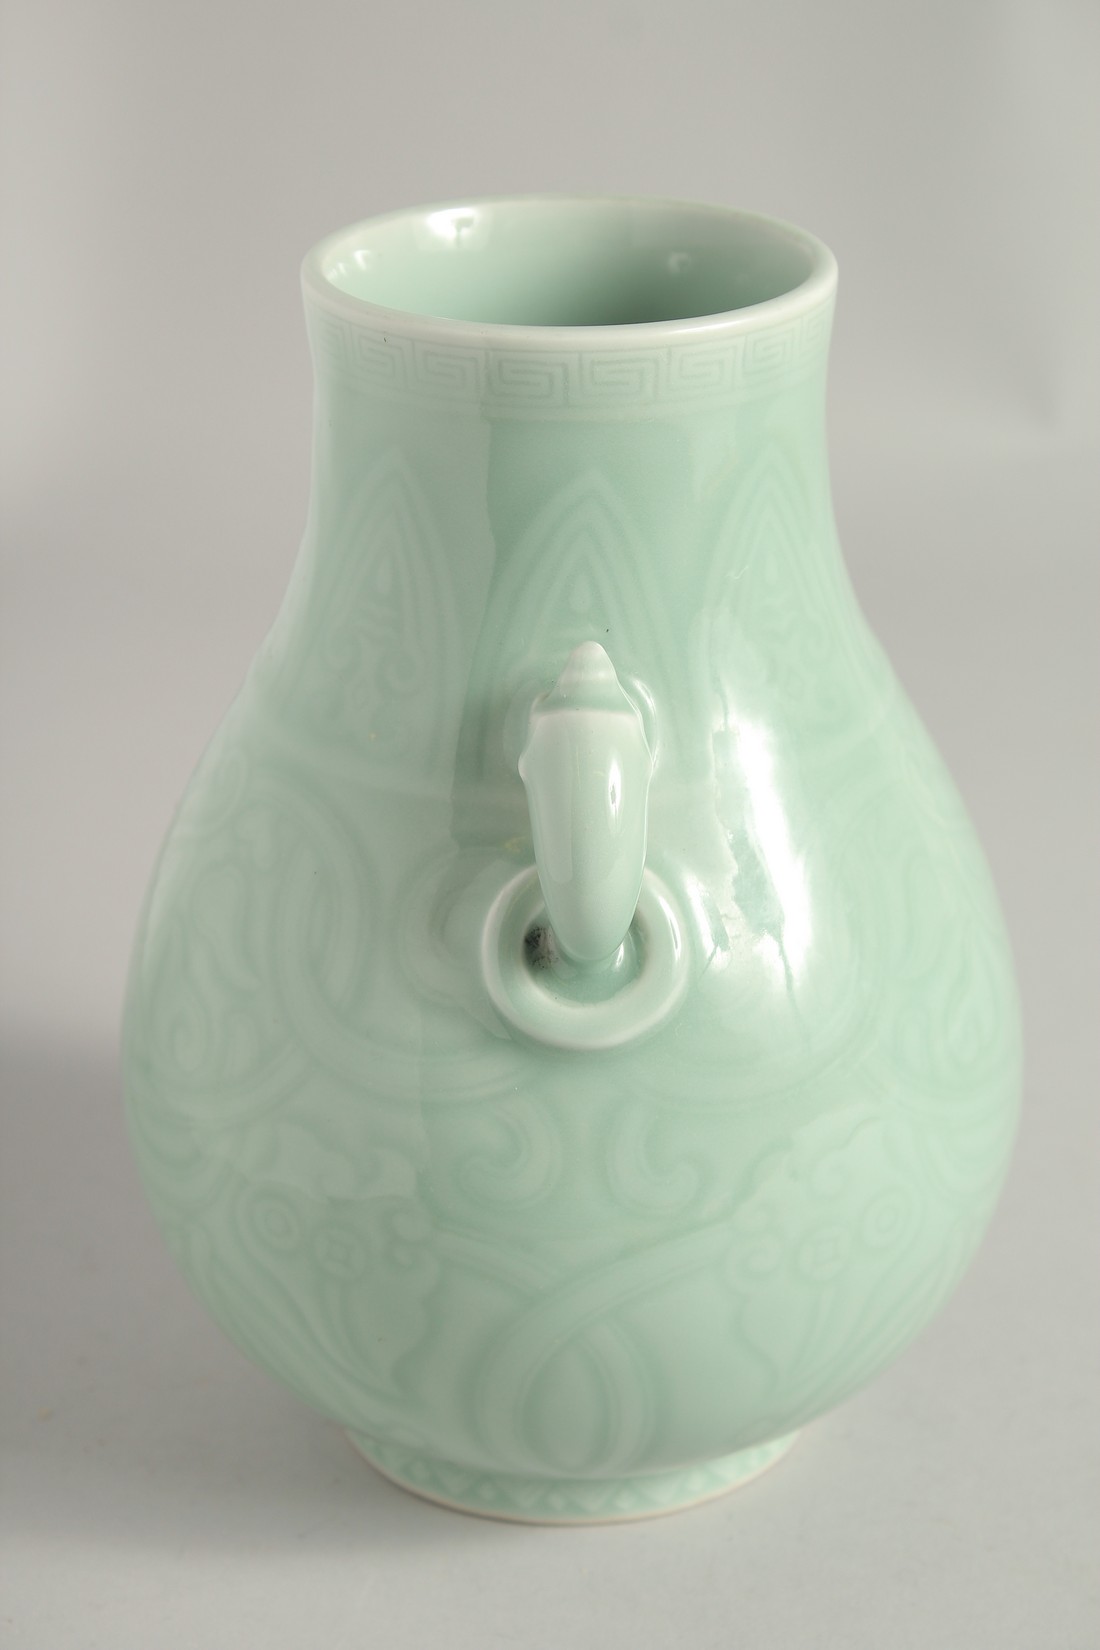 A CHINESE CLAIRE-DE-LUNE CELADON GLAZE TWIN HANDLE VASE, of archaic form with moulded handles and - Image 2 of 8